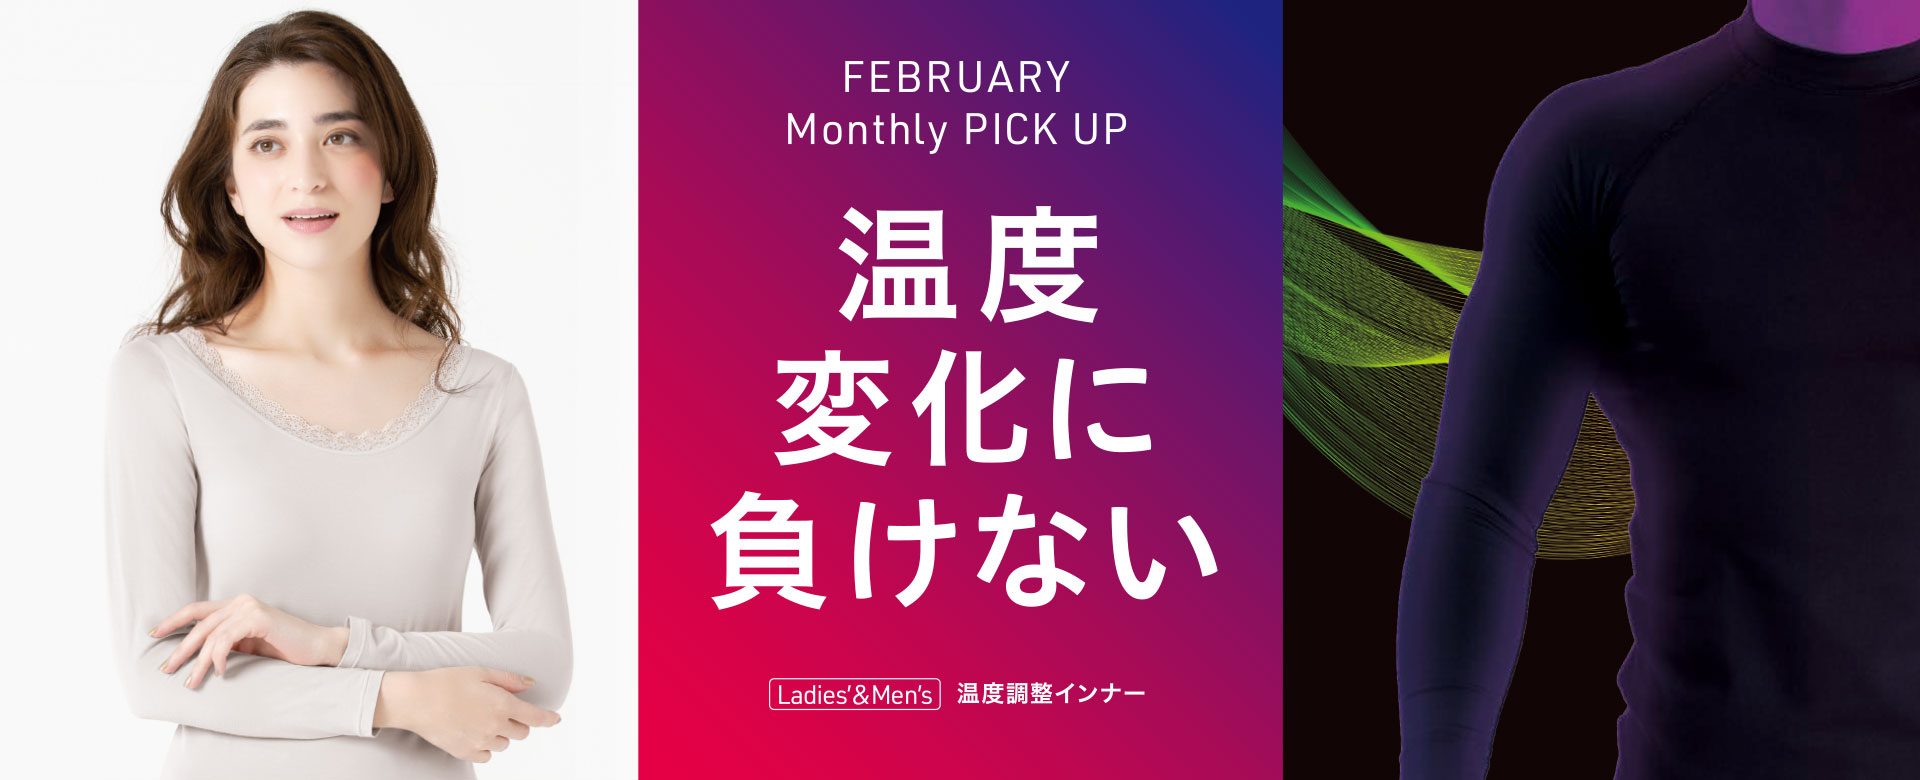 FEBRUARY Monthly PICK UP 温度変化に負けない